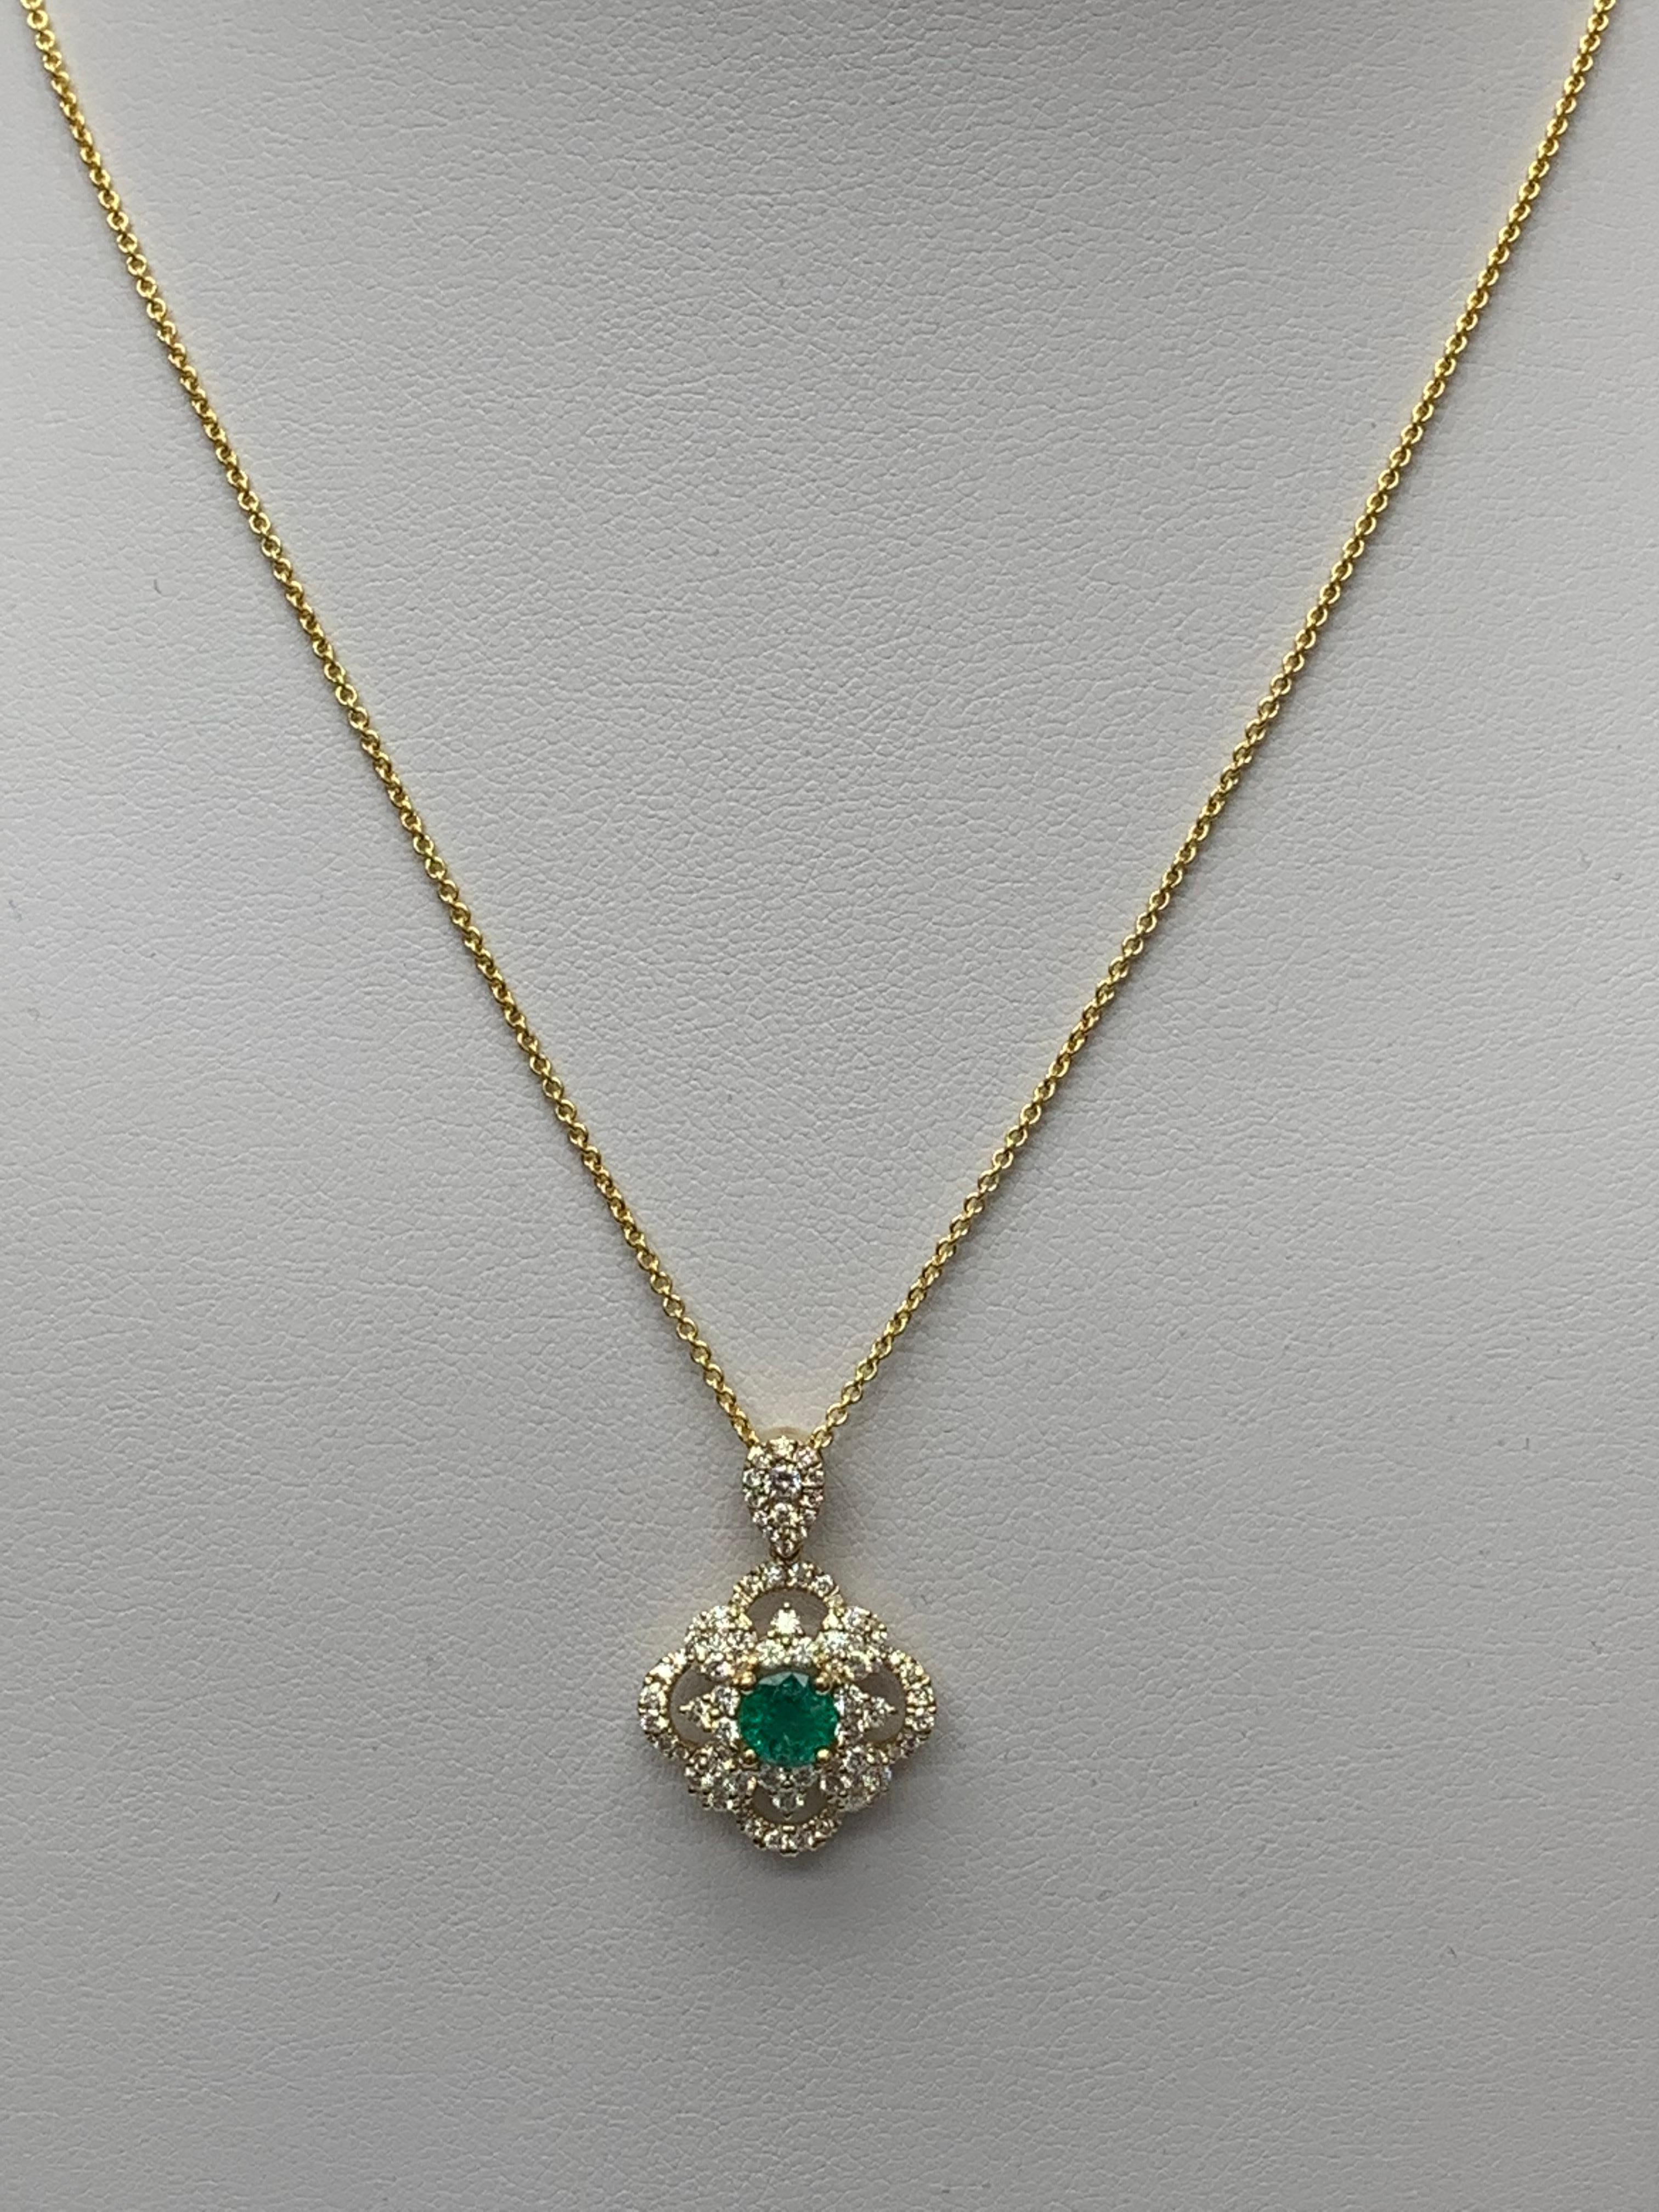 Modern 0.67 Carat Round Cut Emerald and Diamond Pendant Necklace in 18K Yellow Gold For Sale